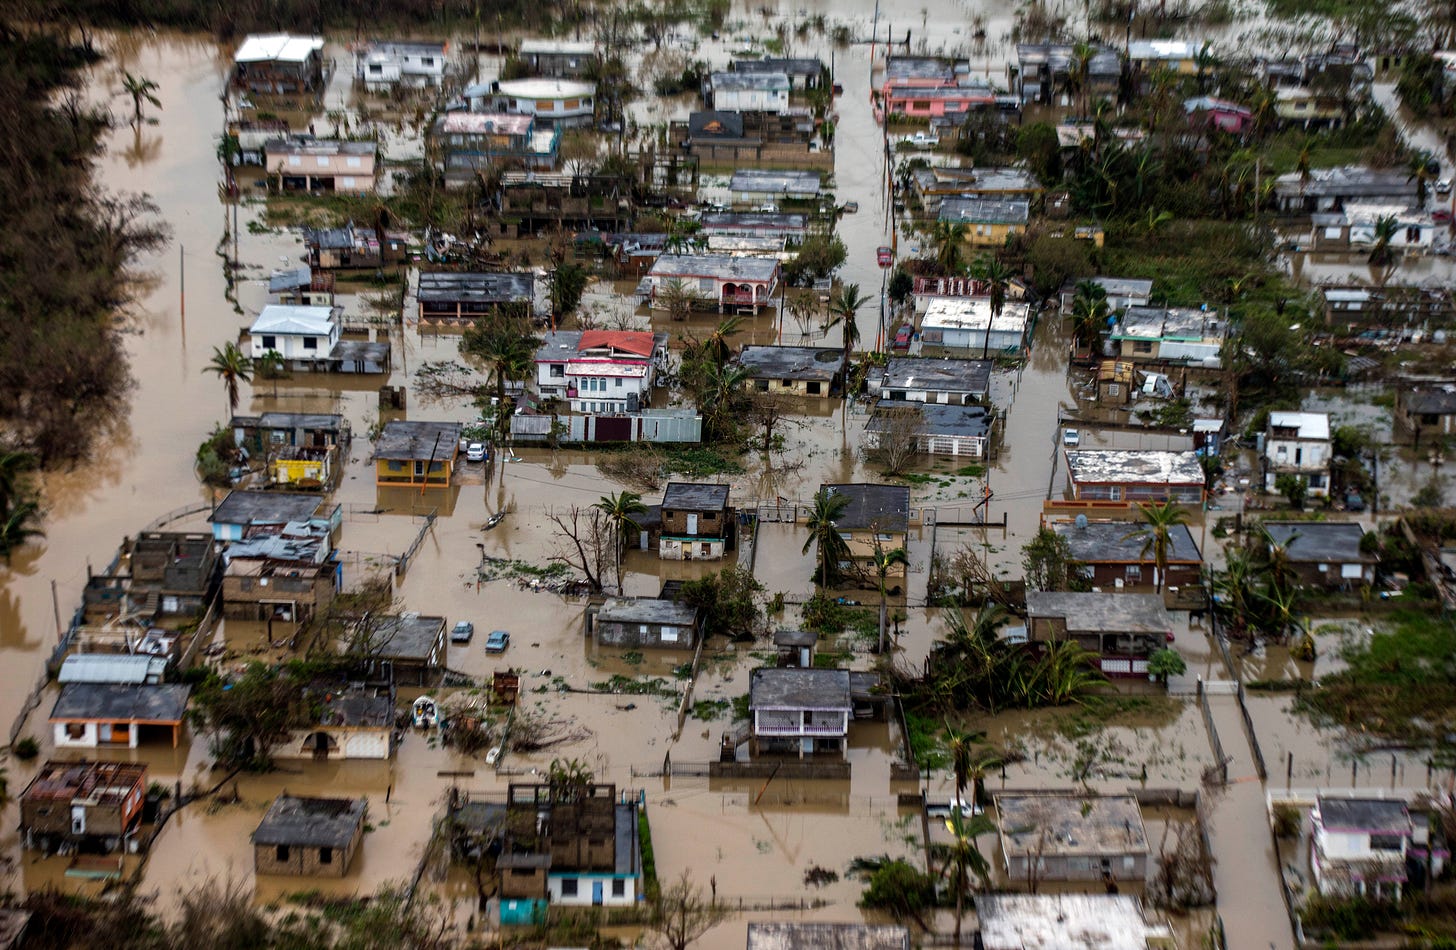 Hurricane Maria: 'Thousands of people could die.' 70,000 in Puerto Rico urged to evacuate with dam in 'imminent' danger of failure - The Washington Post